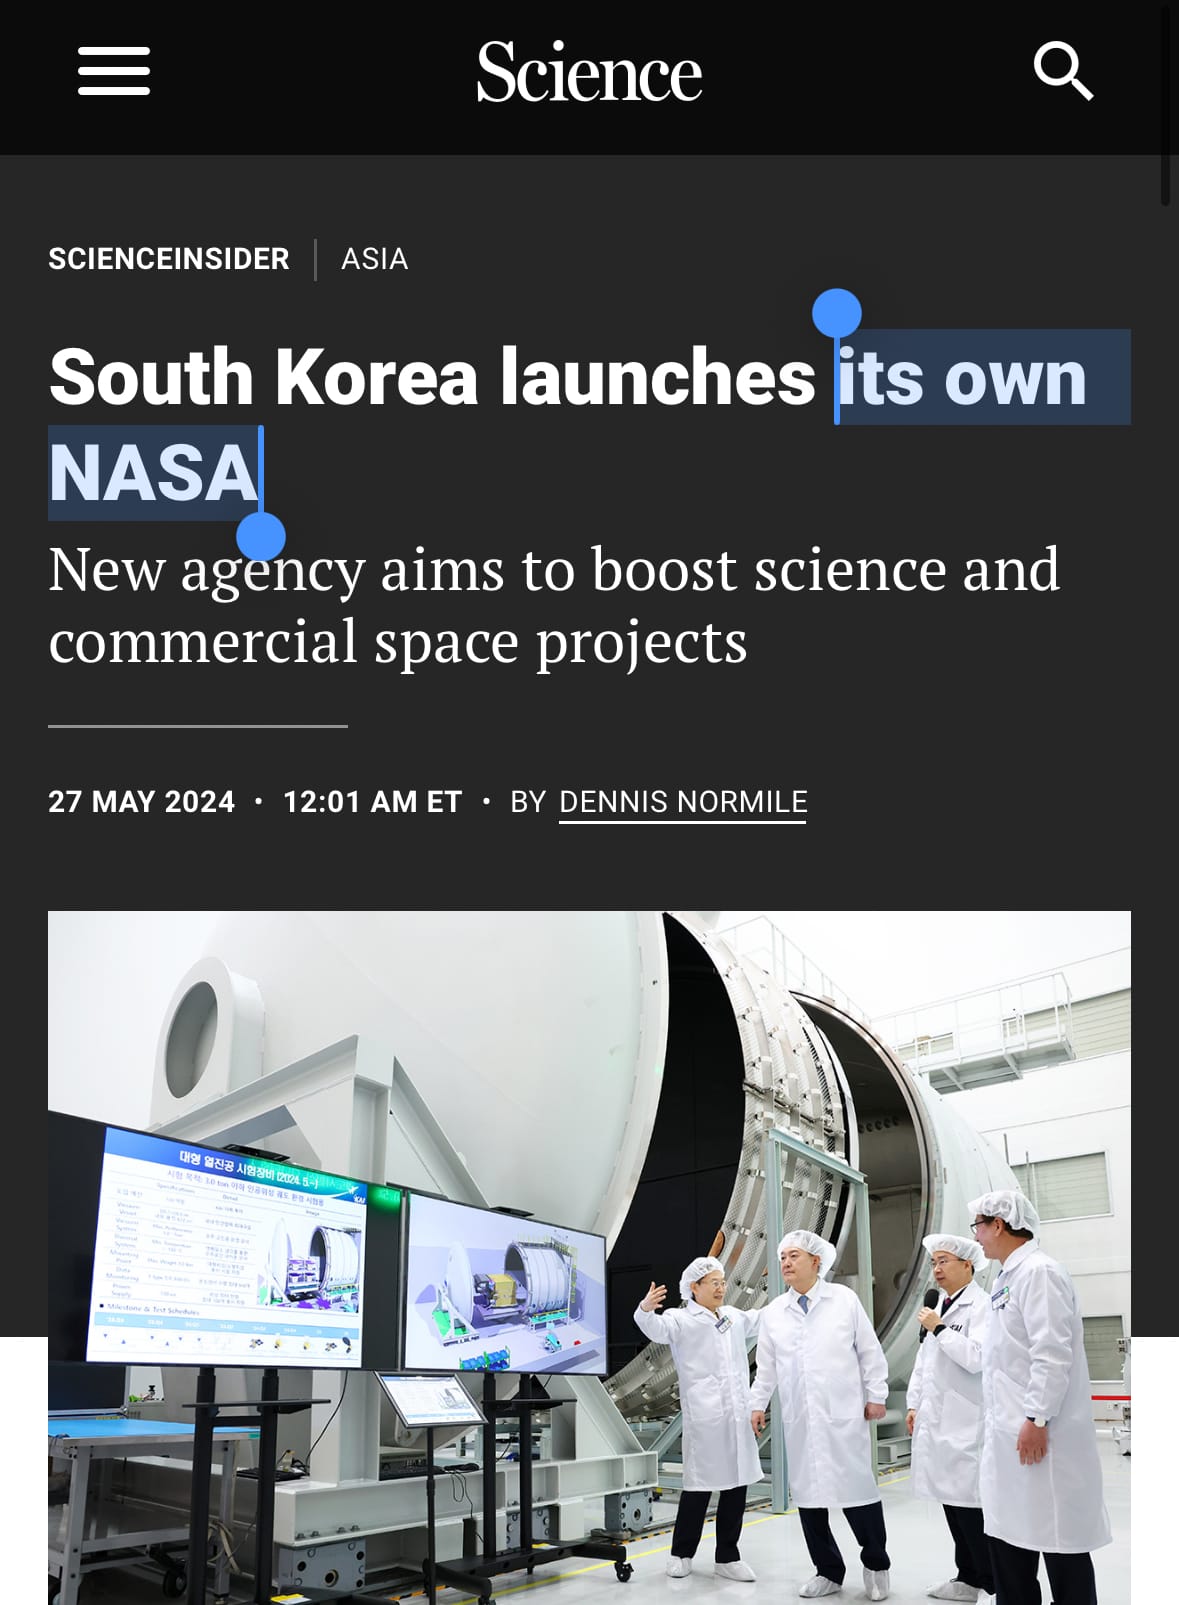 Screengrab from the Science.org article at https://www.science.org/content/article/south-korea-launches-its-own-nasa